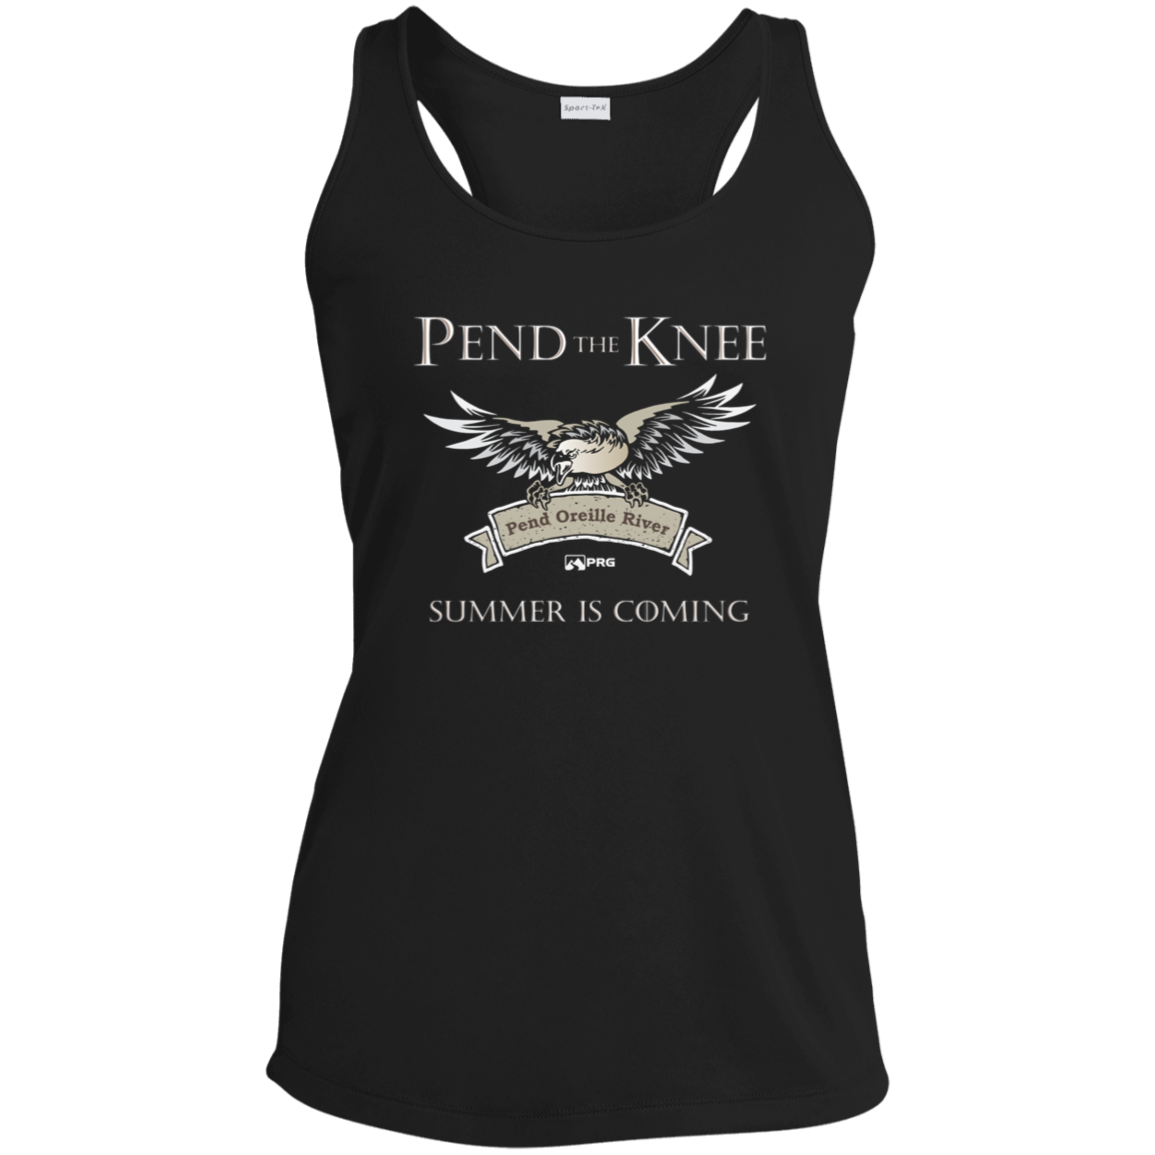 Pend the Knee - Womens Racerback